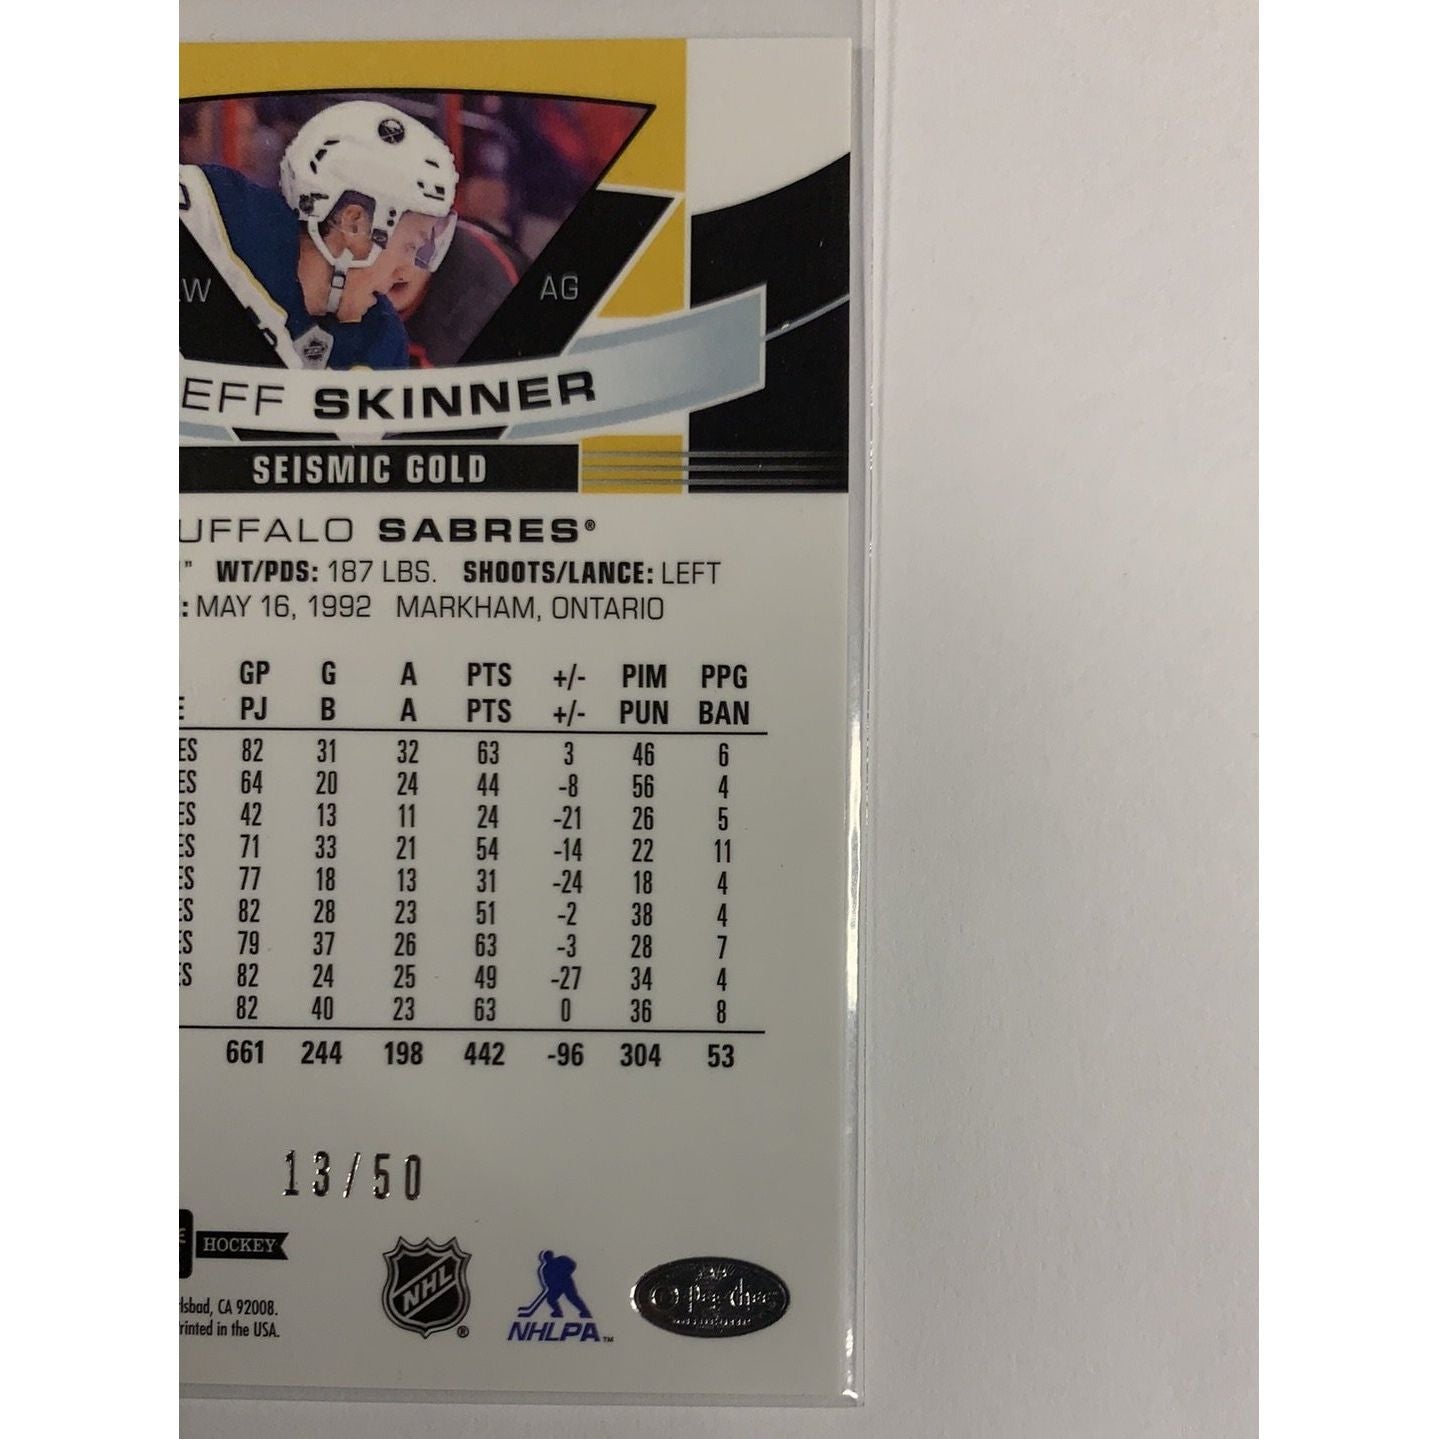  2019-20 O-Pee-Chee Platinum Jeff Skinner Seismic Gold /50  Local Legends Cards & Collectibles